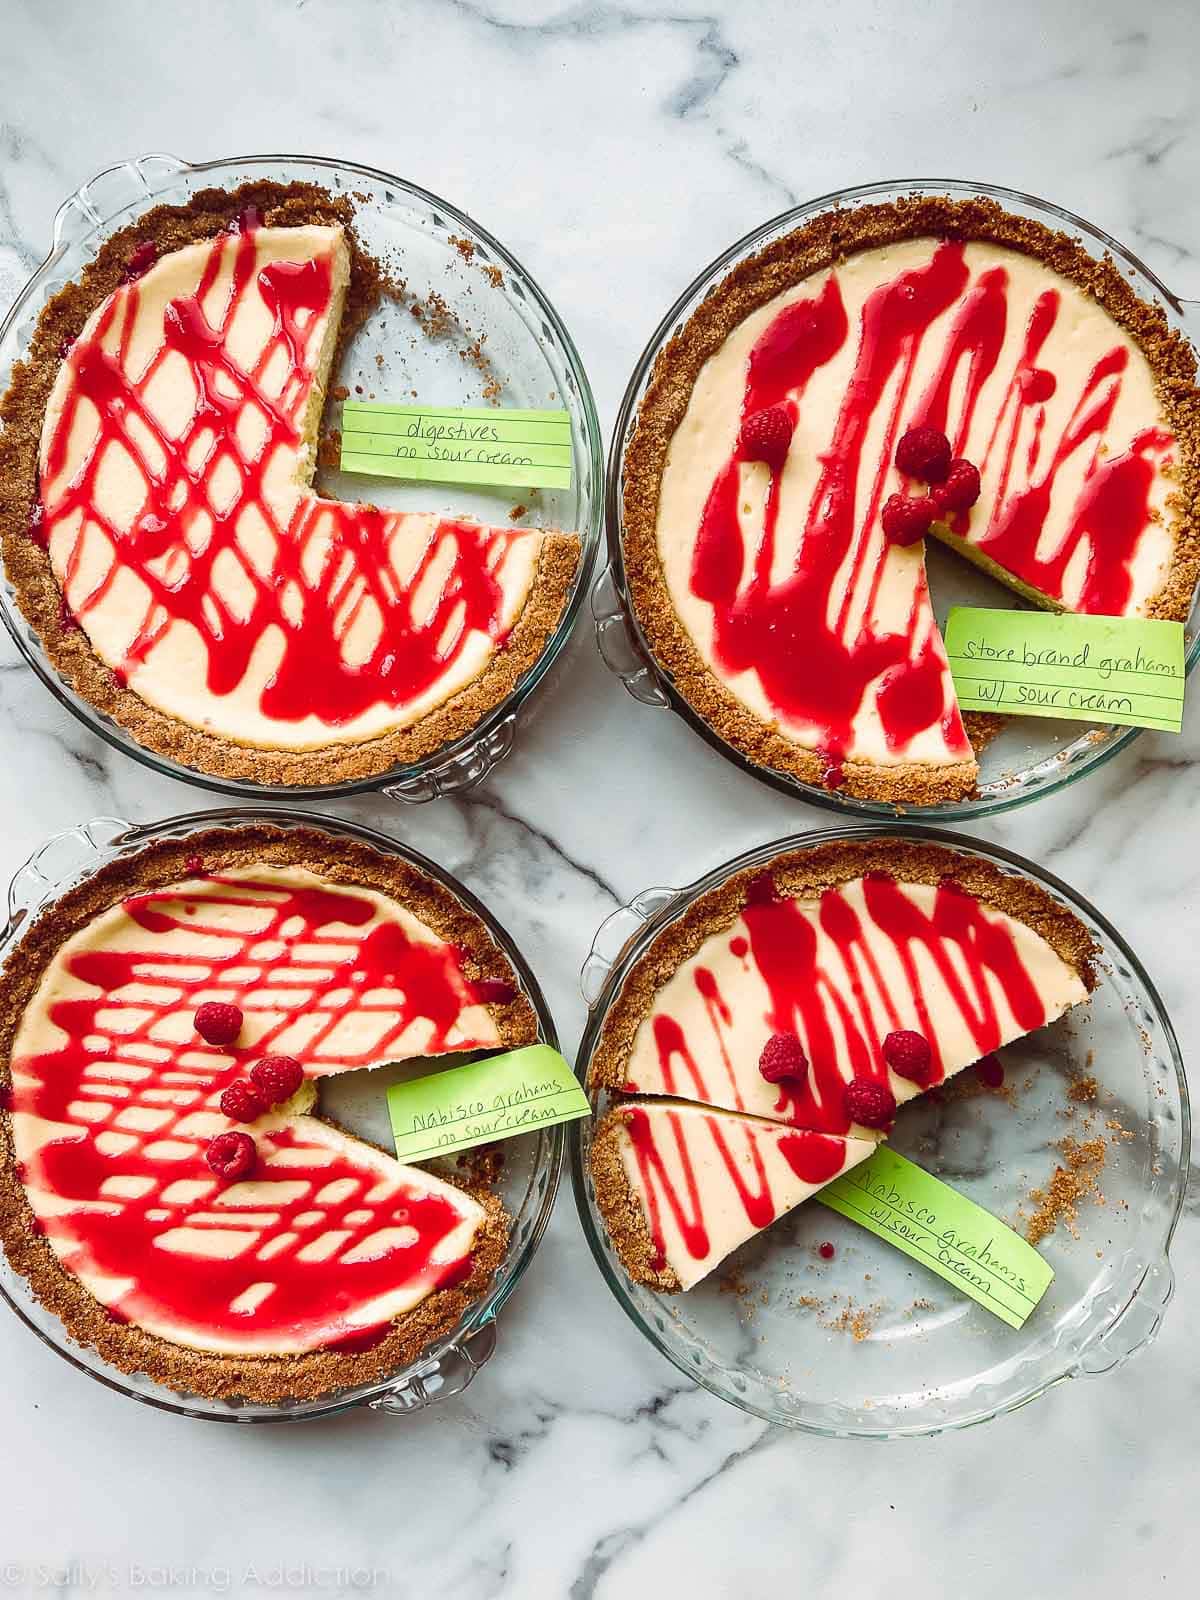 4 cheesecake pies with raspberry sauce and sticky notes on top used for comparison.